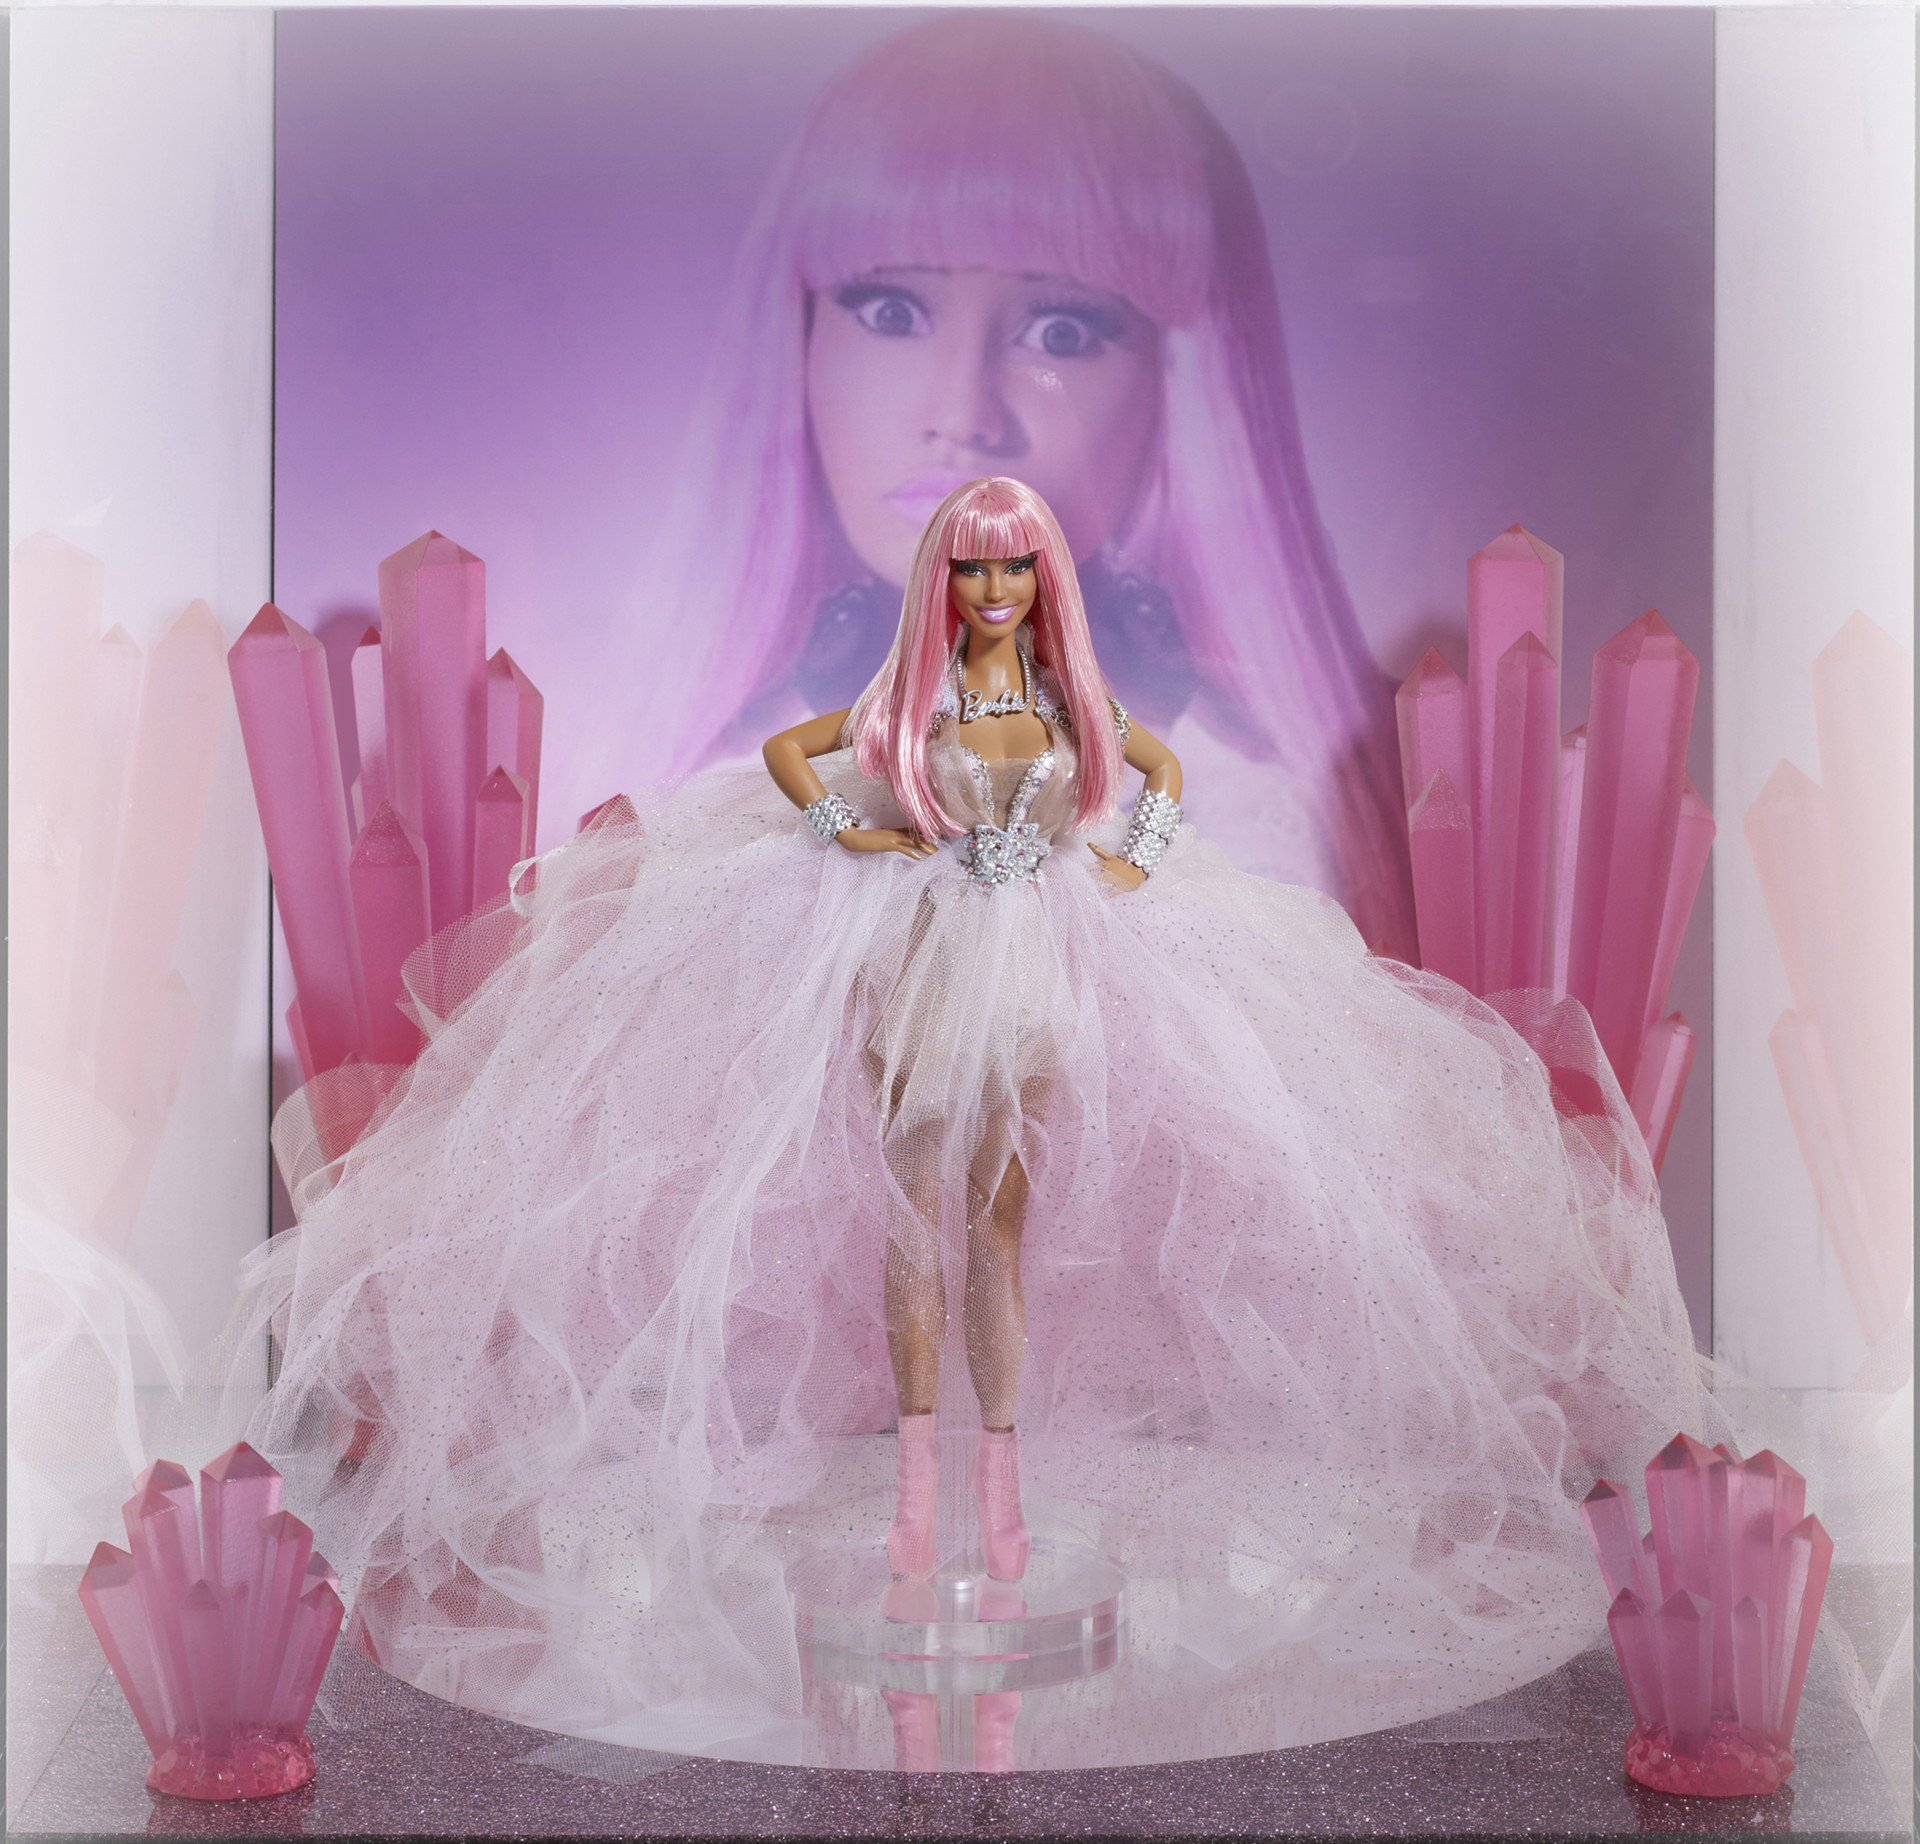 <p>The famous Barbie-inspired outfit she wore (more than a decade before the movie made it cool!) was transformed into a unique doll and sold for charity.</p>